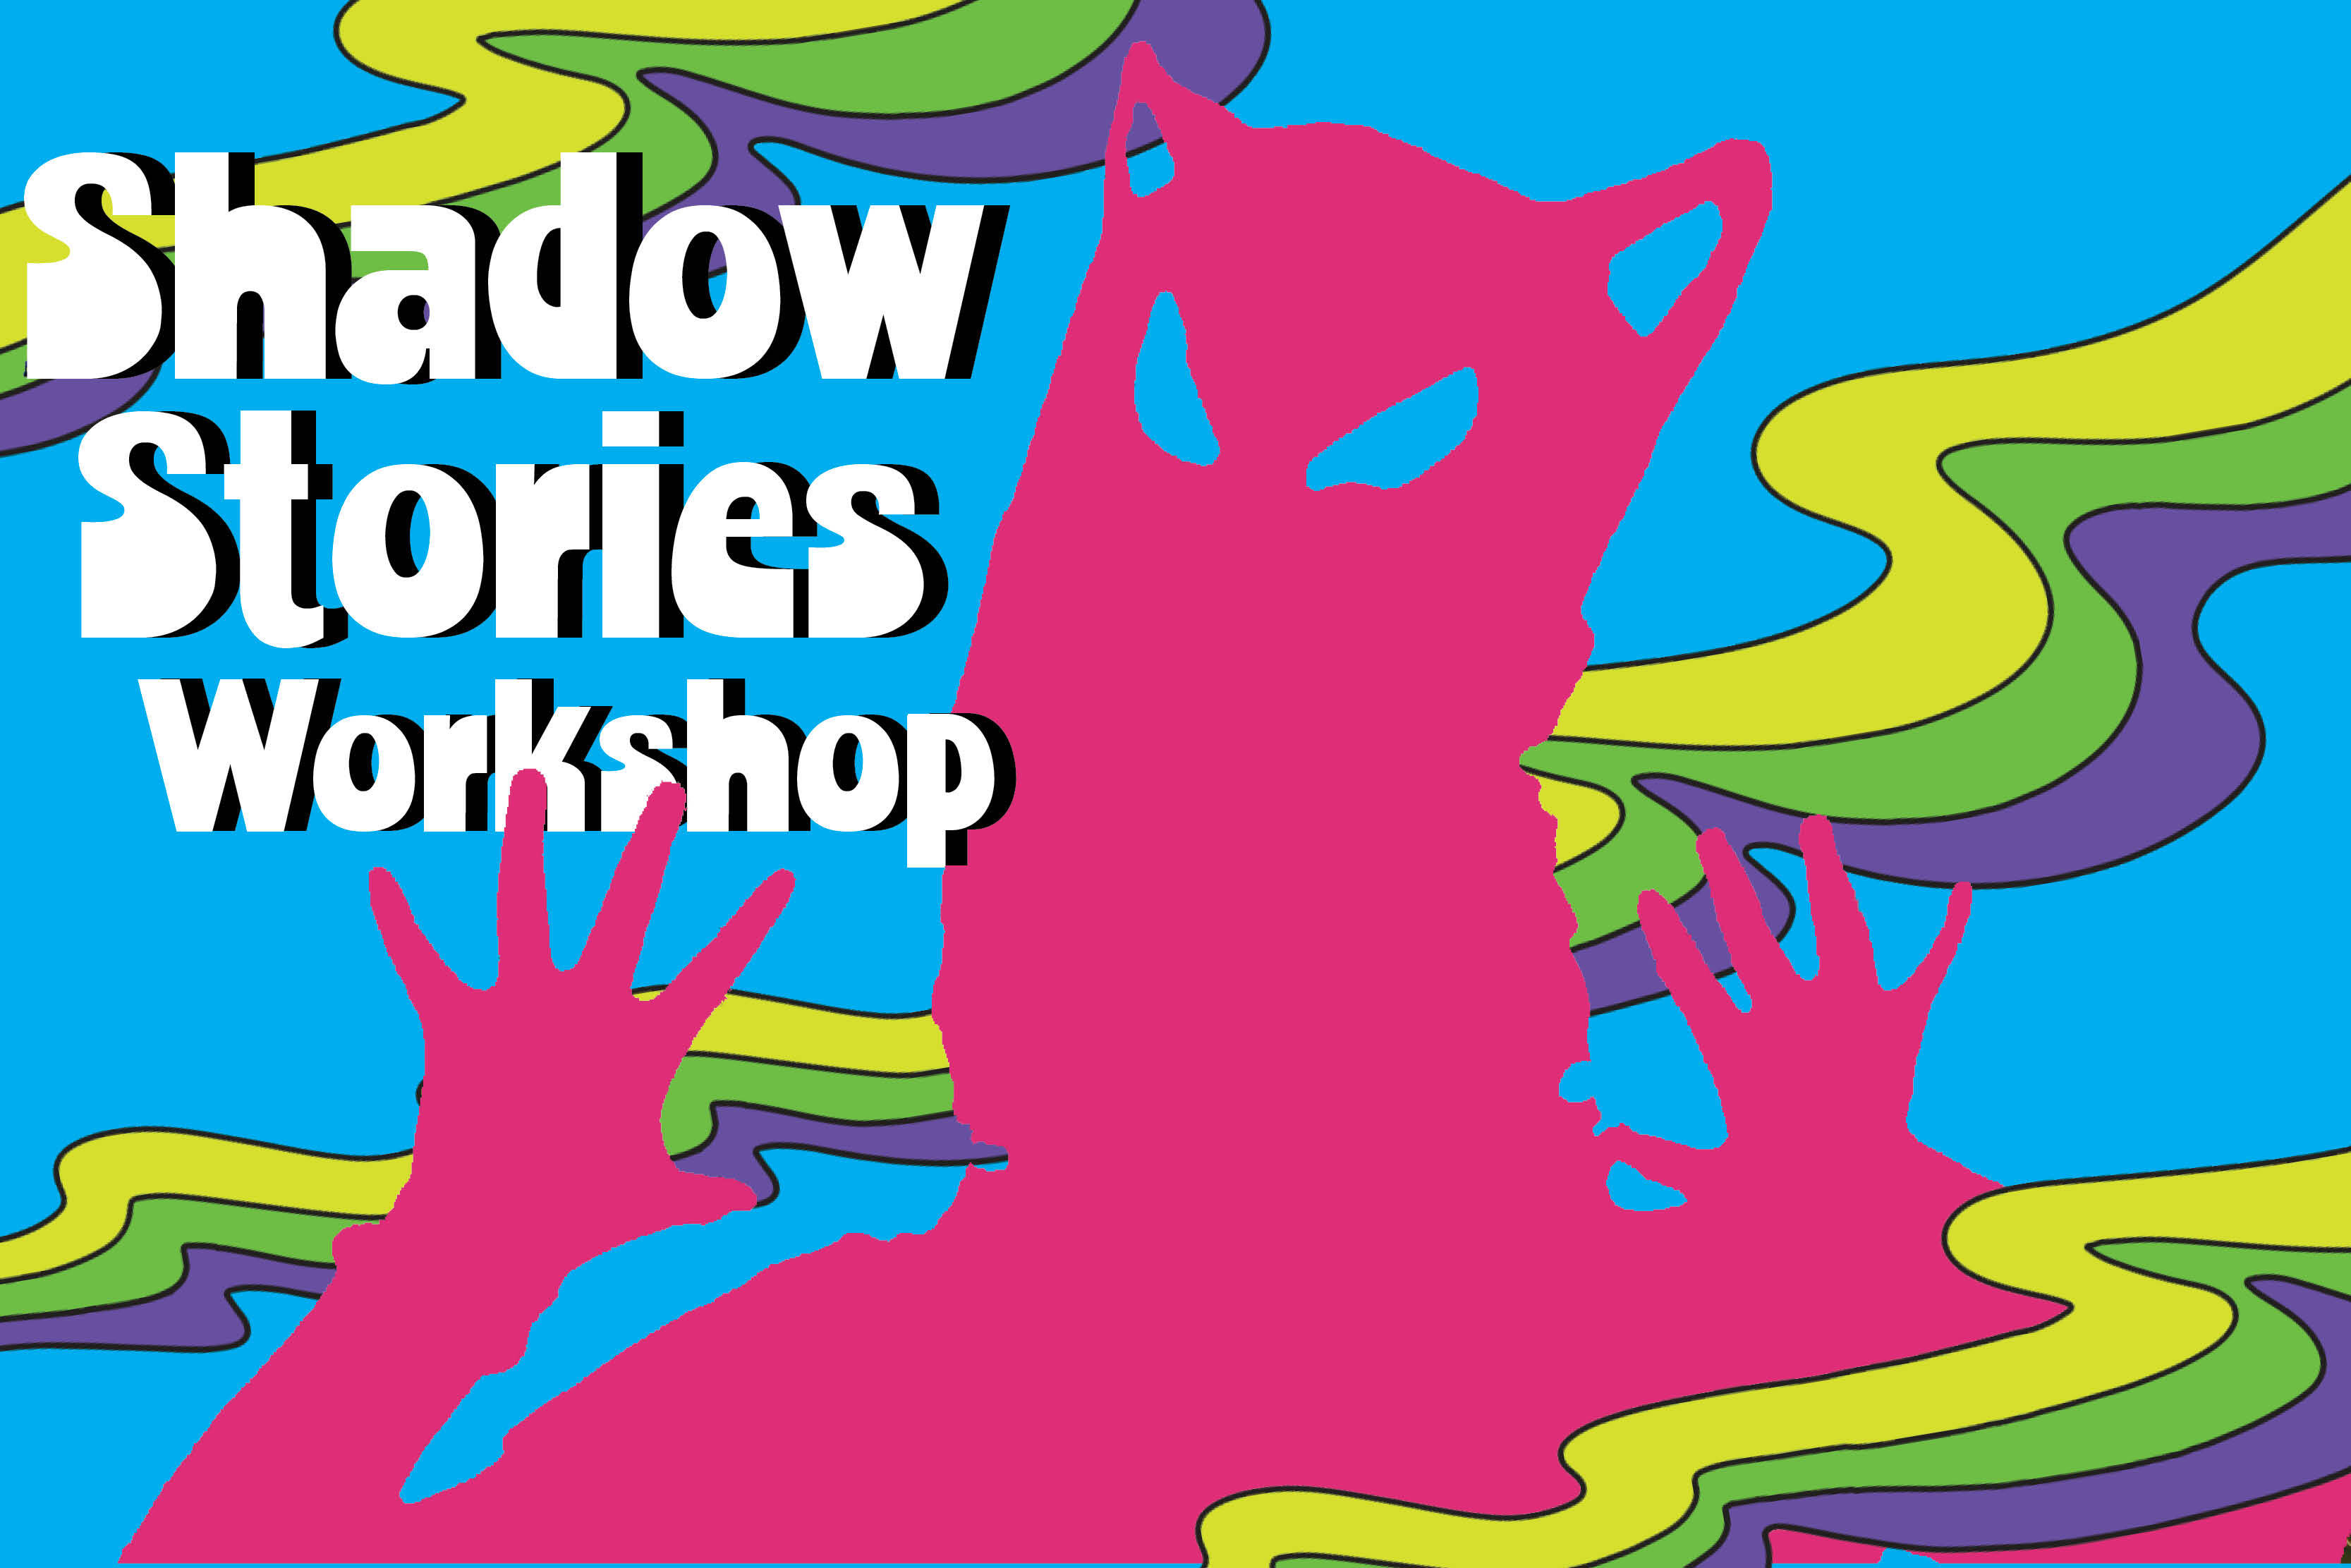 Shadow Stories Workshop - a pink silhouette of a cat-like figure with two hands raised. Swirls of color are overlaid in the back.